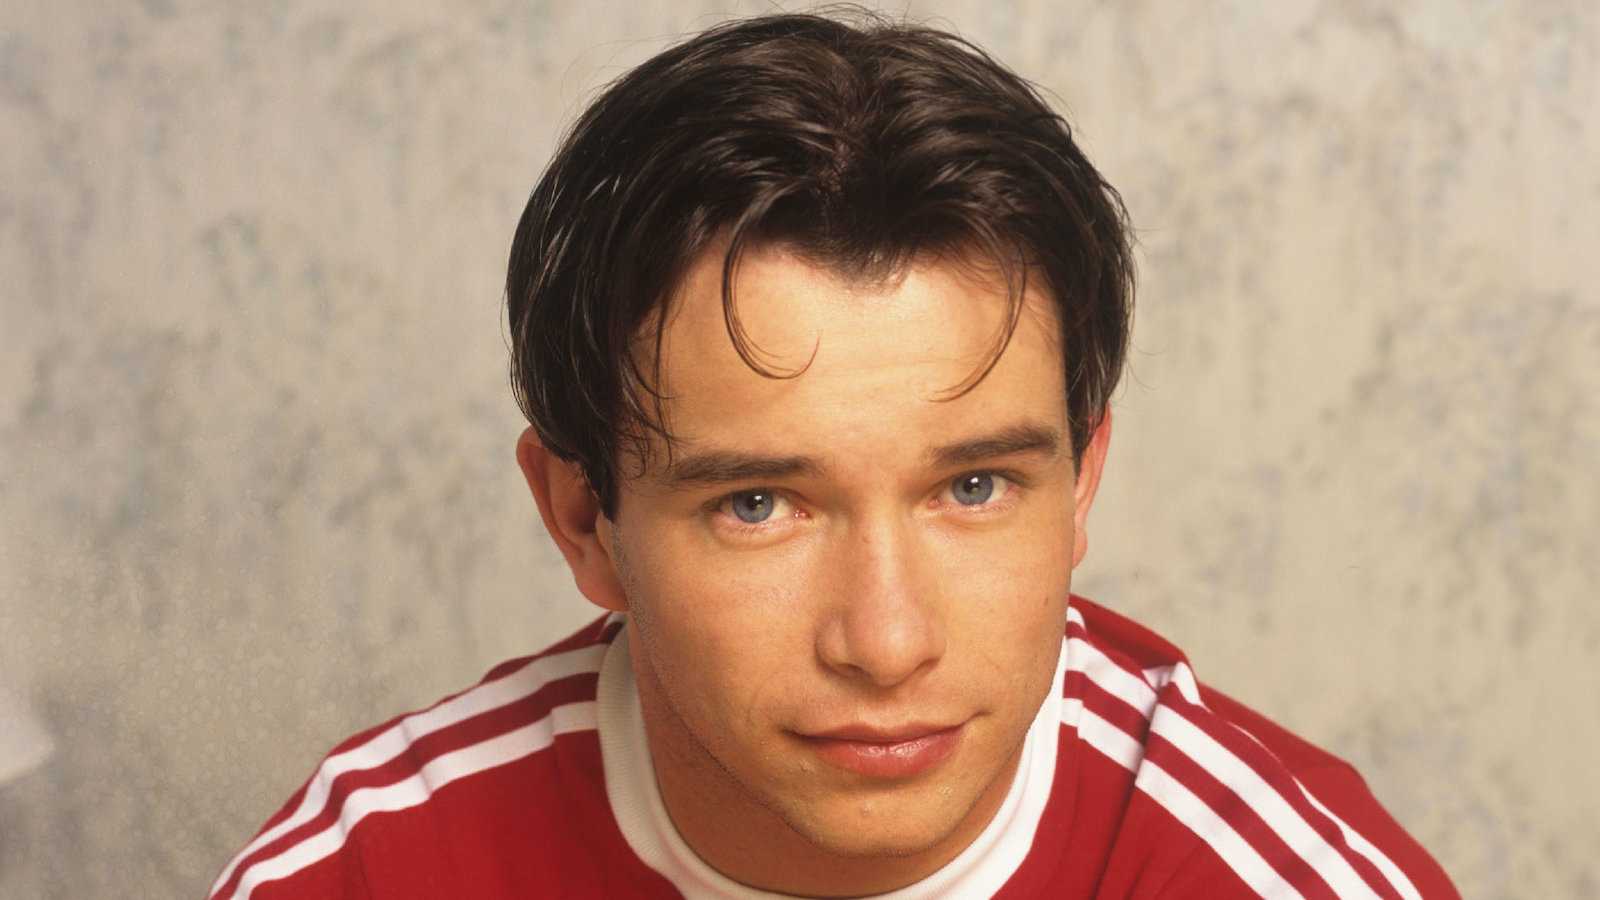 As one of the lead singers in Boyzone, Stephen Gately was one of the hottest gay singers of all time